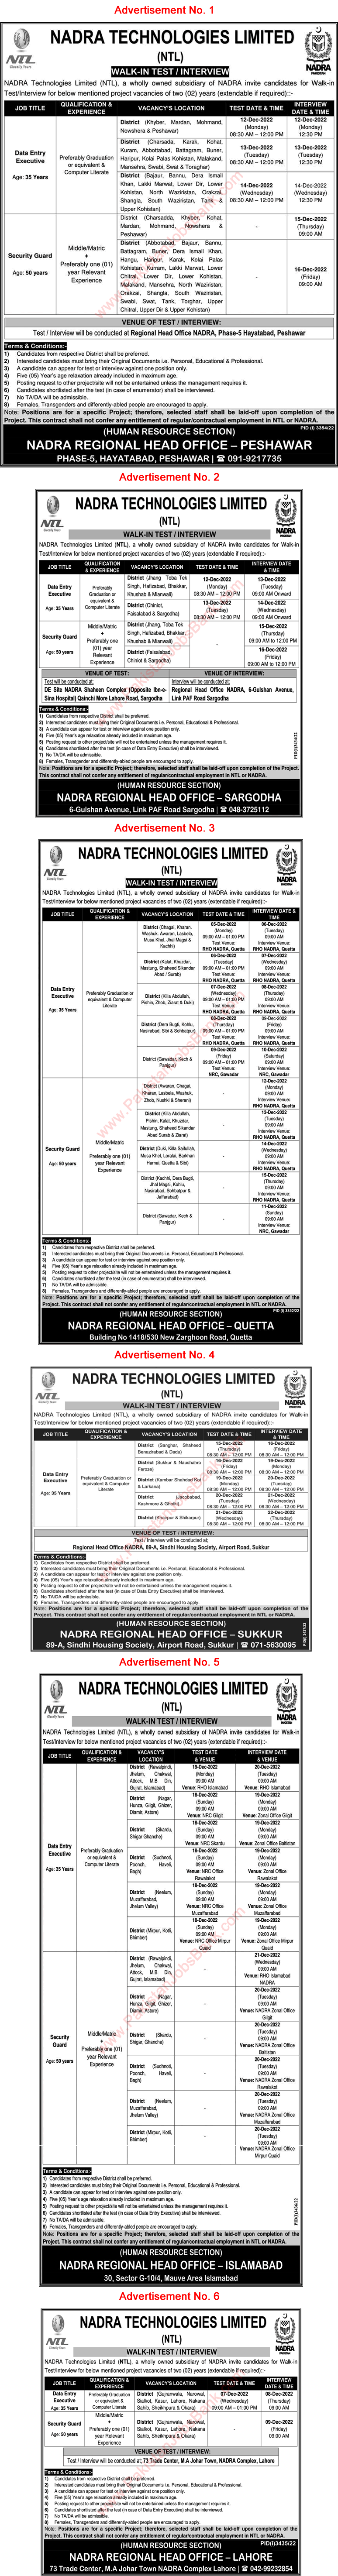 NADRA Technologies Limited Jobs December 2022 Walk in Test / Interview Data Entry Executives & Security Guards Latest